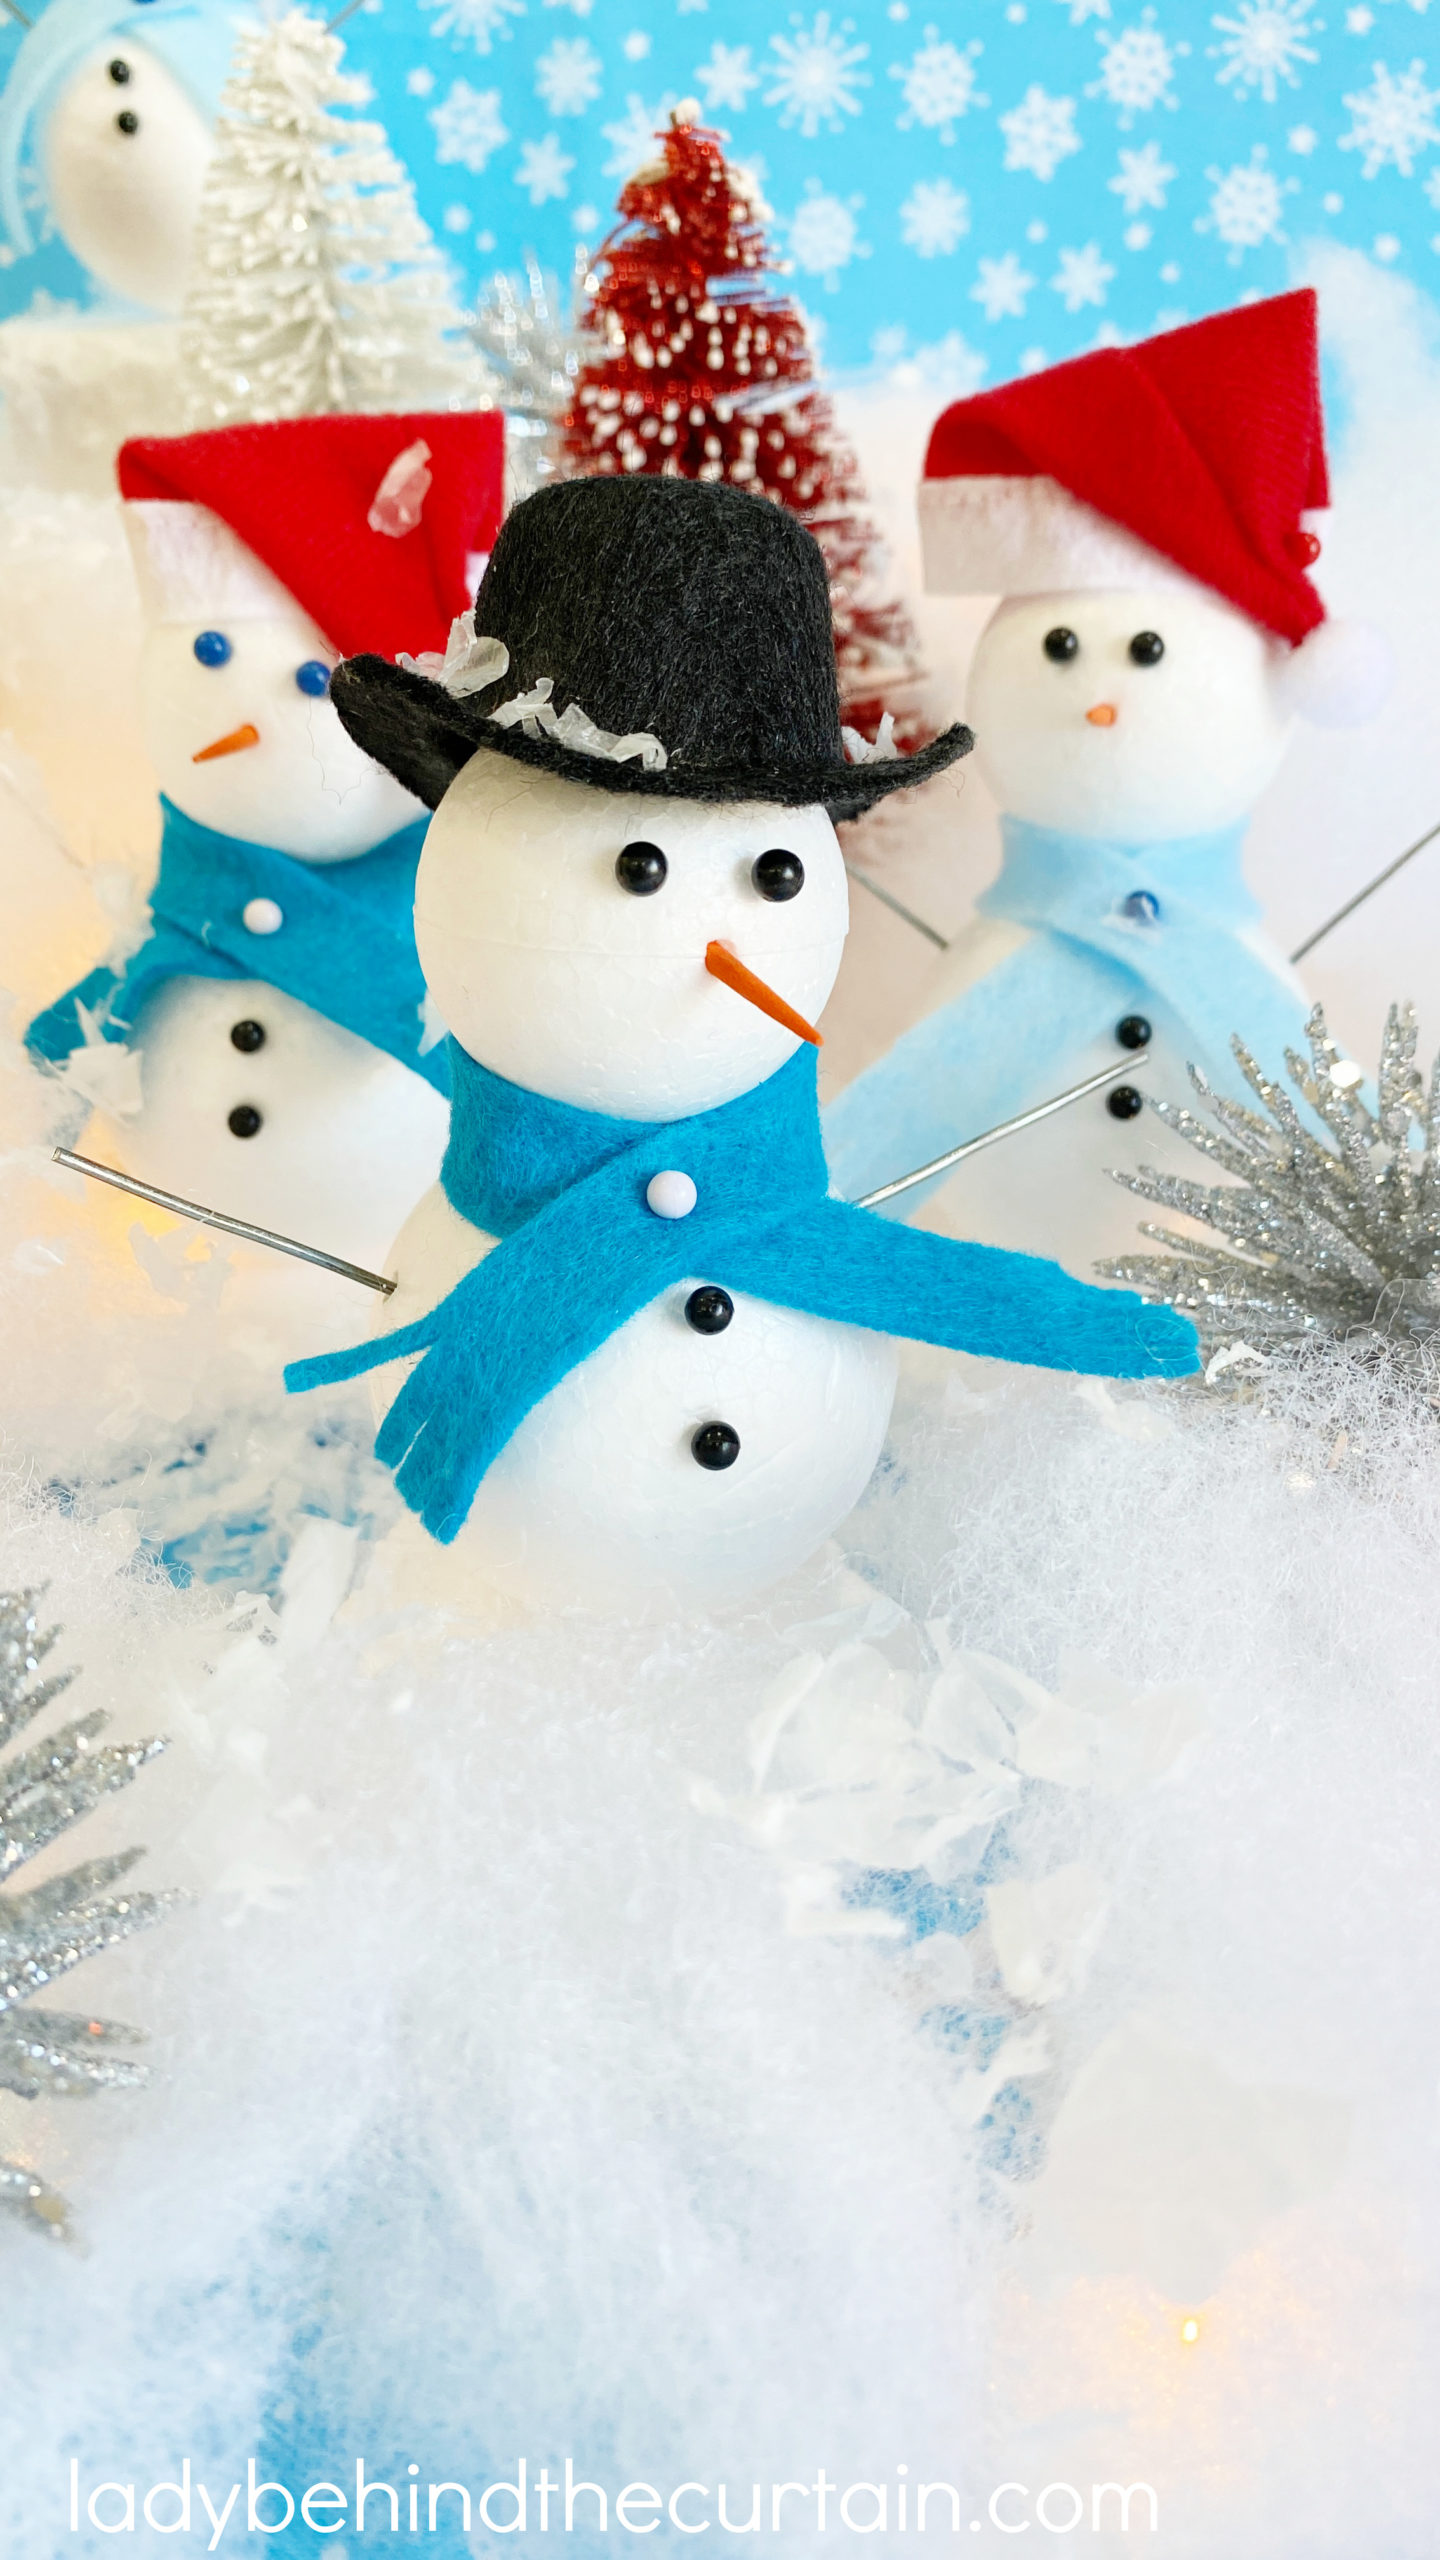 https://www.ladybehindthecurtain.com/wp-content/uploads/2021/12/Build-a-Snowman-Kit-8-scaled.jpg